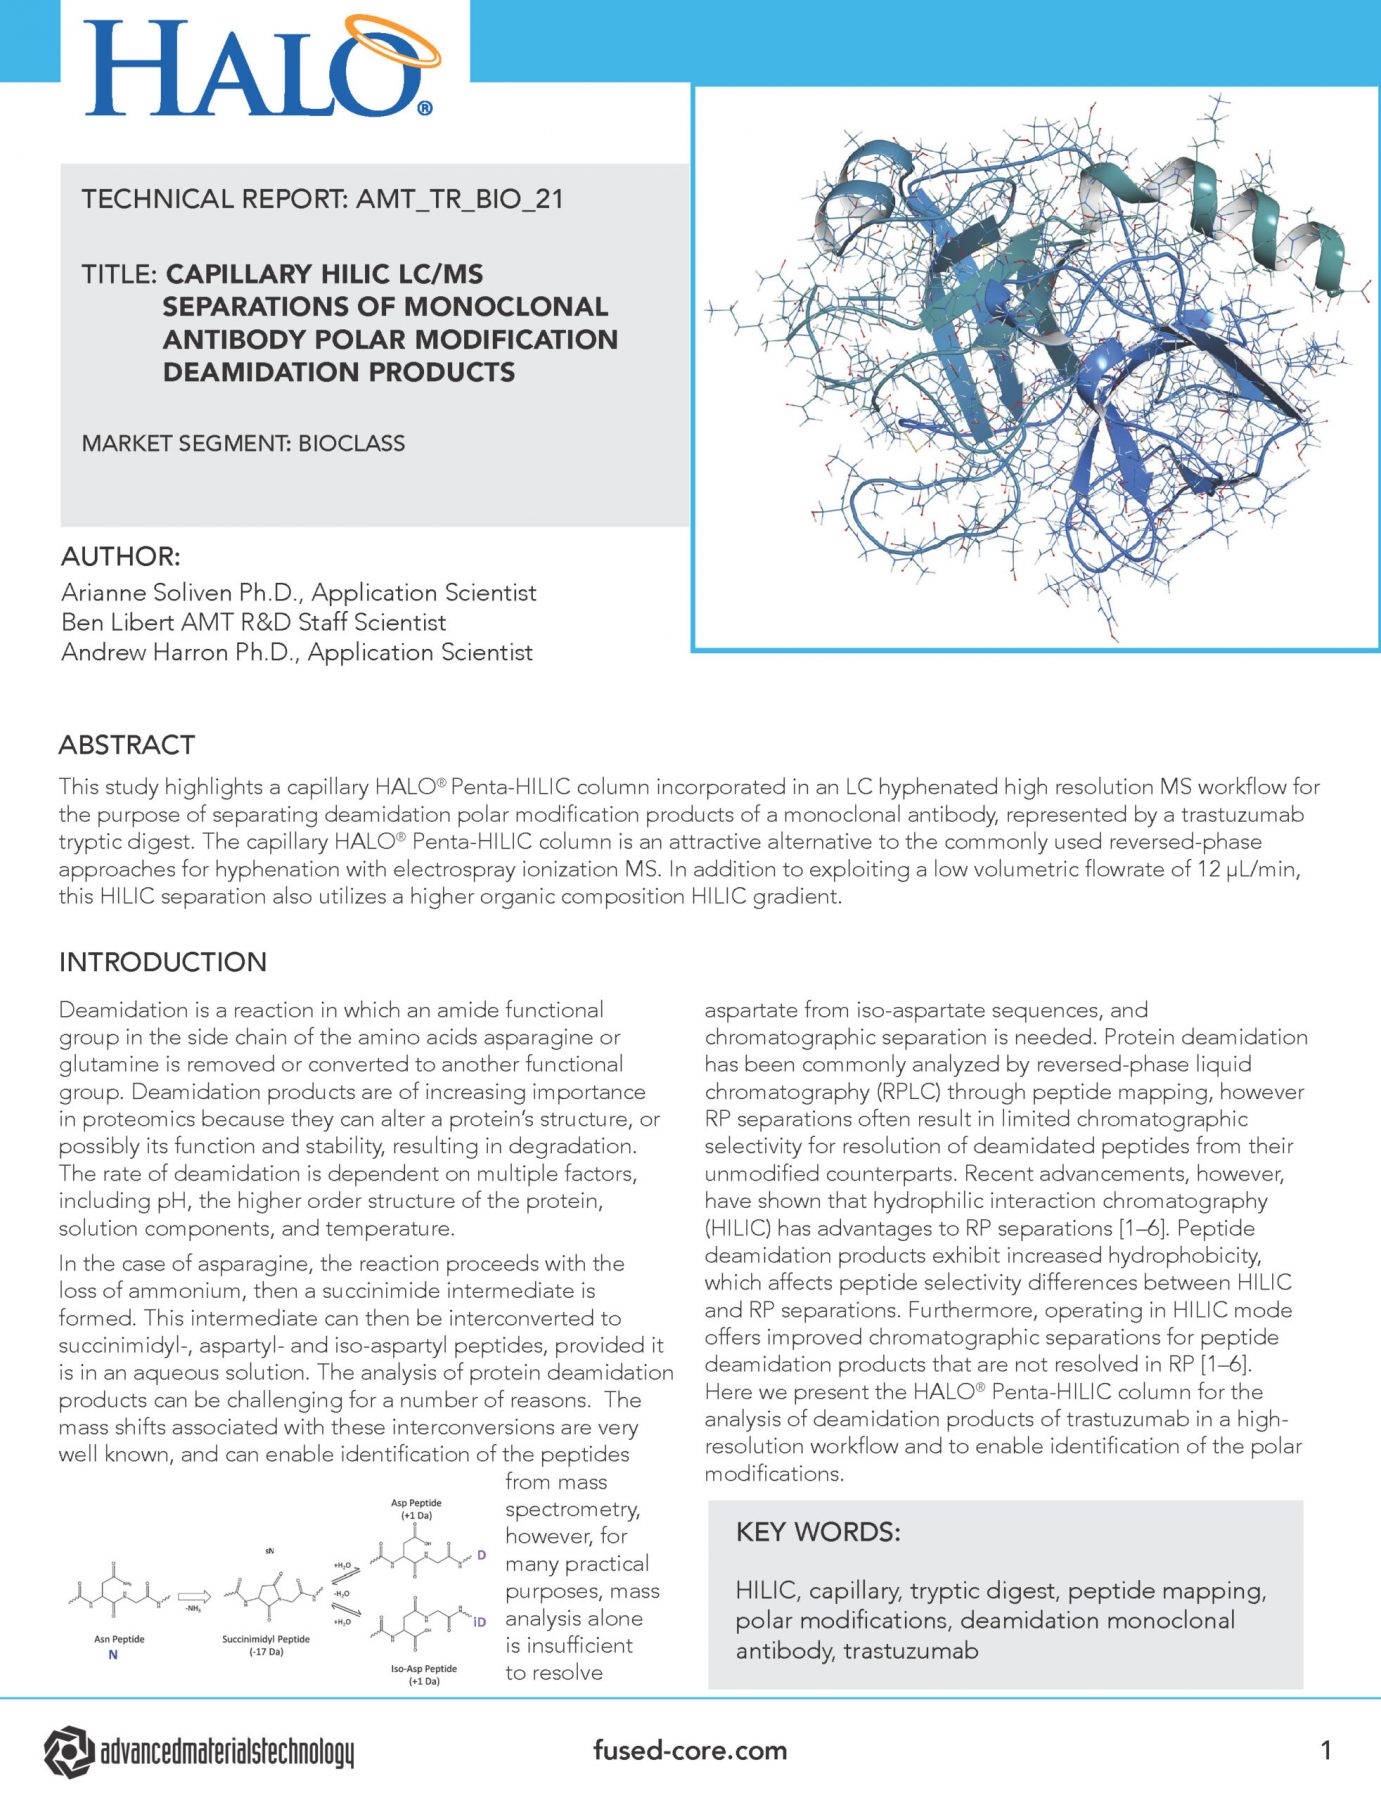 halo technical report on capillary hilic lc/ms separations